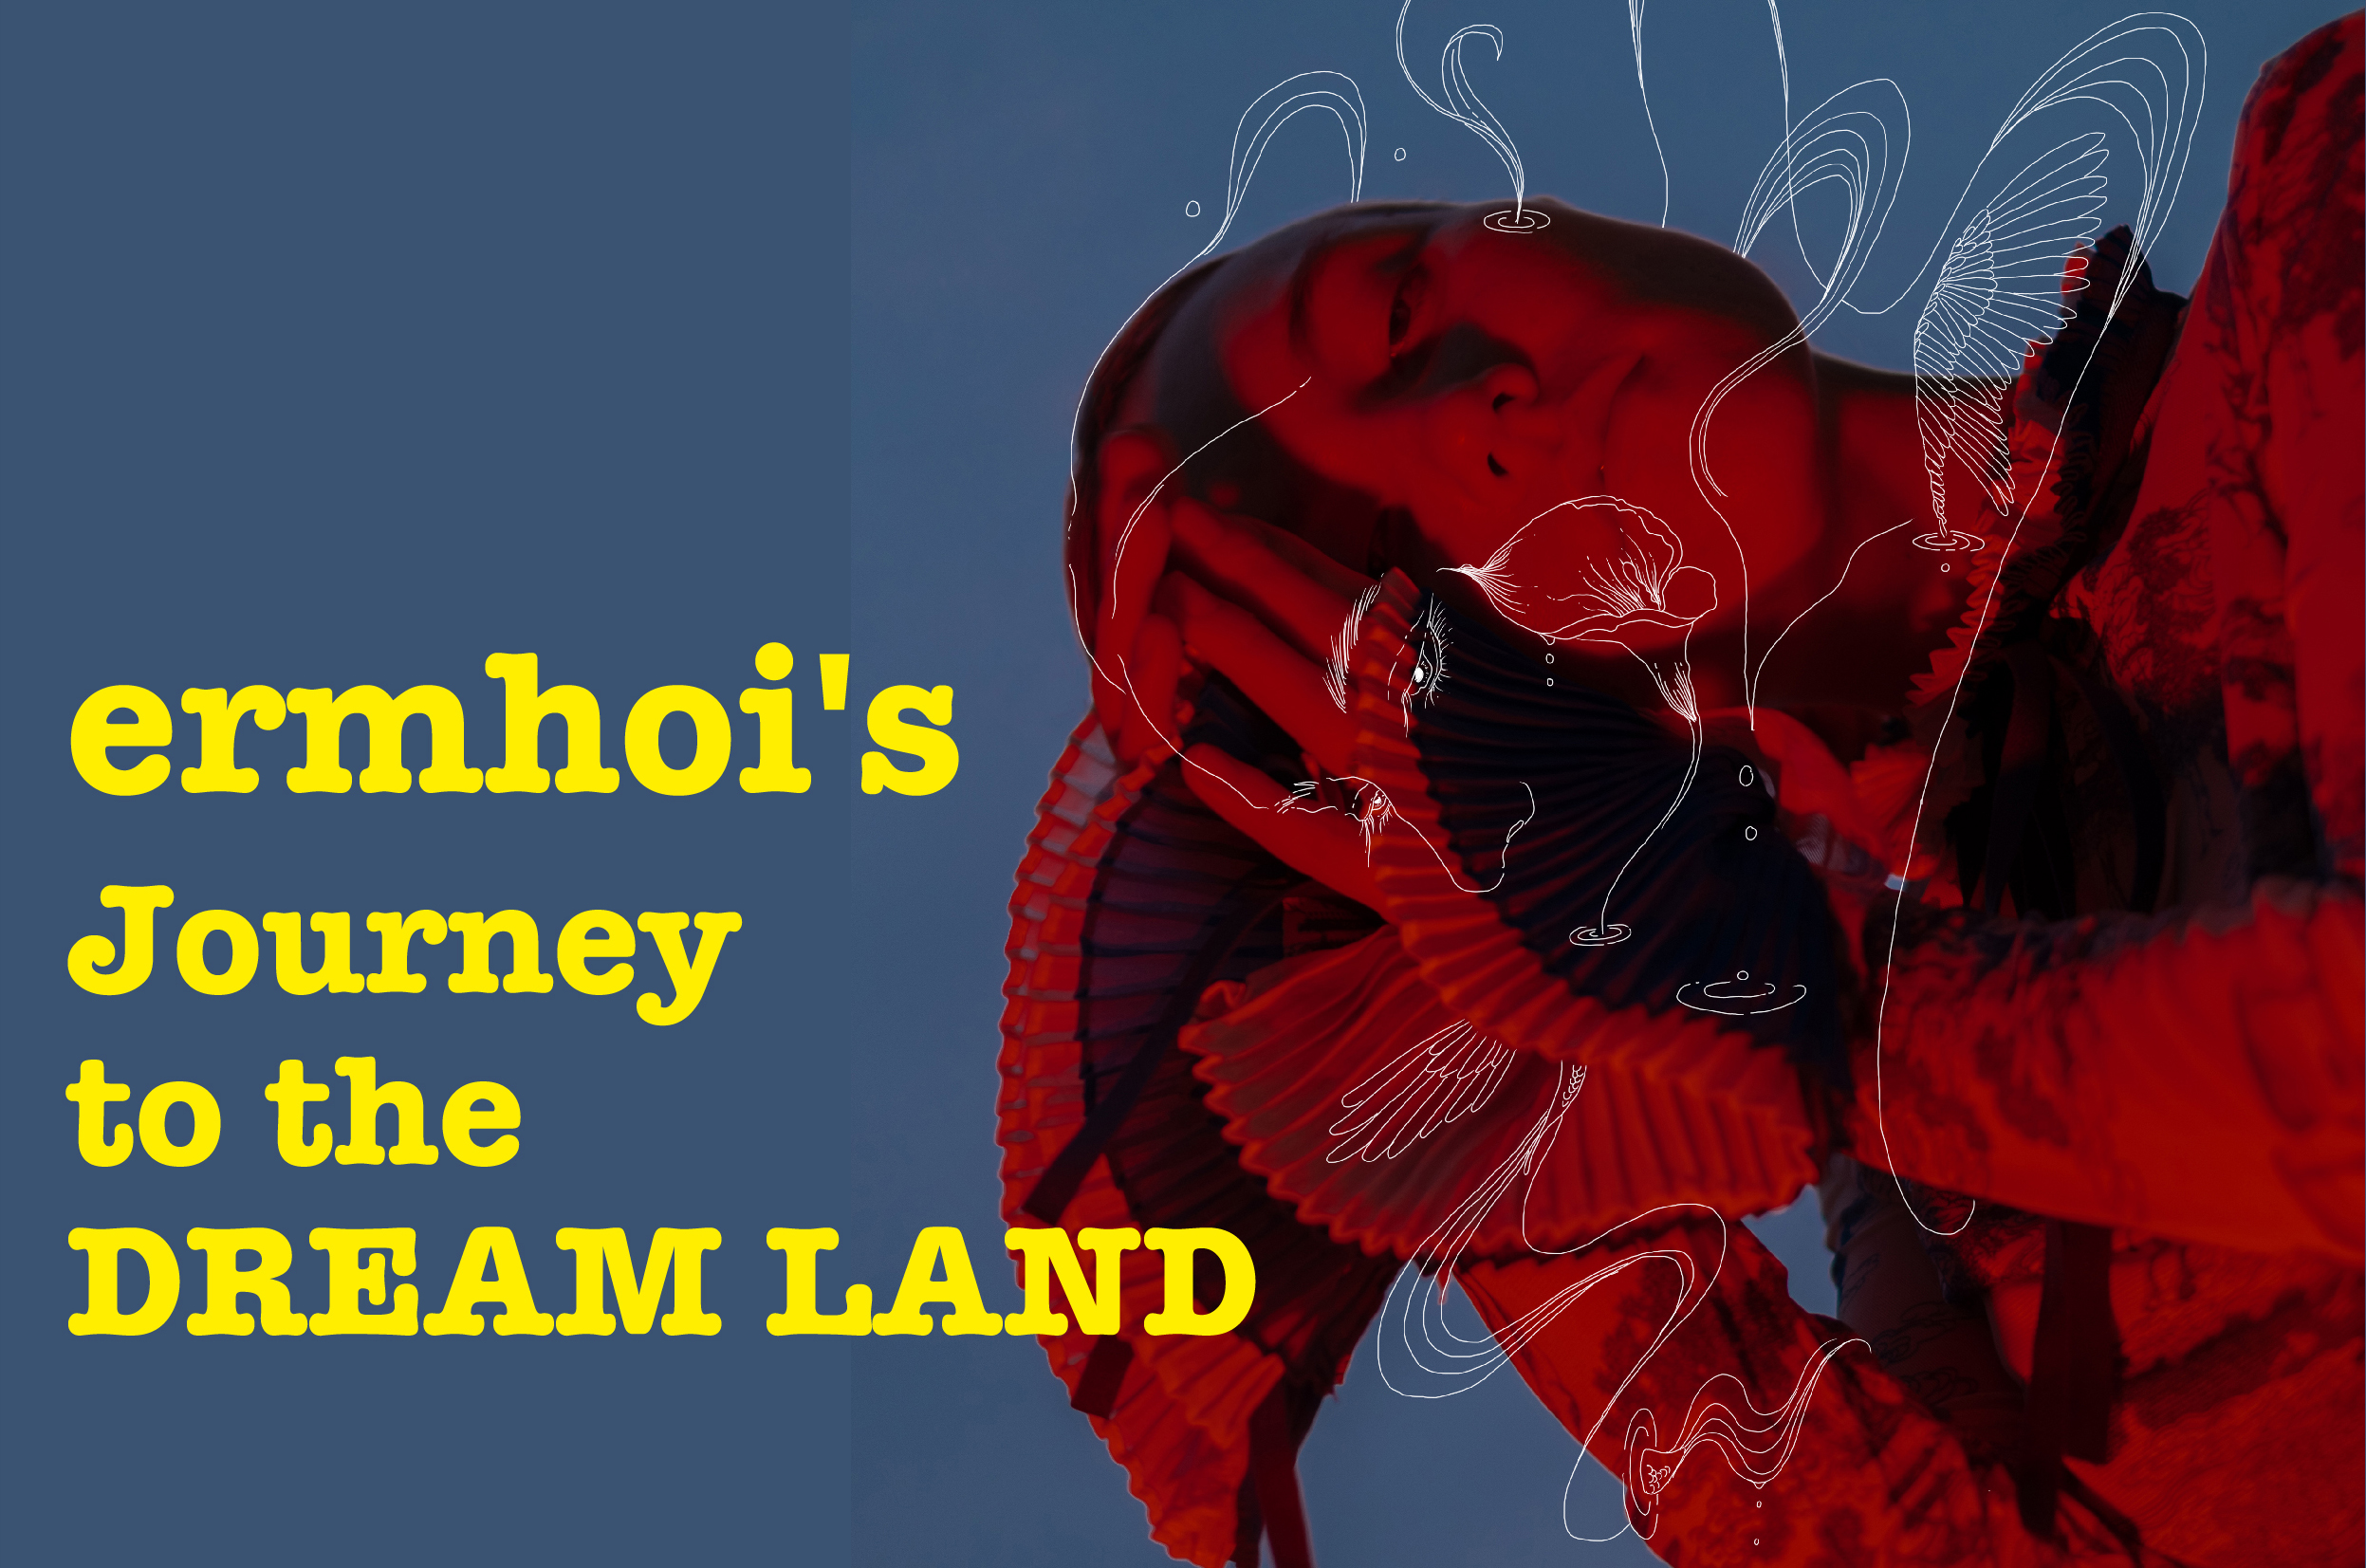 ermhoi's Journey to the DREAM LAND